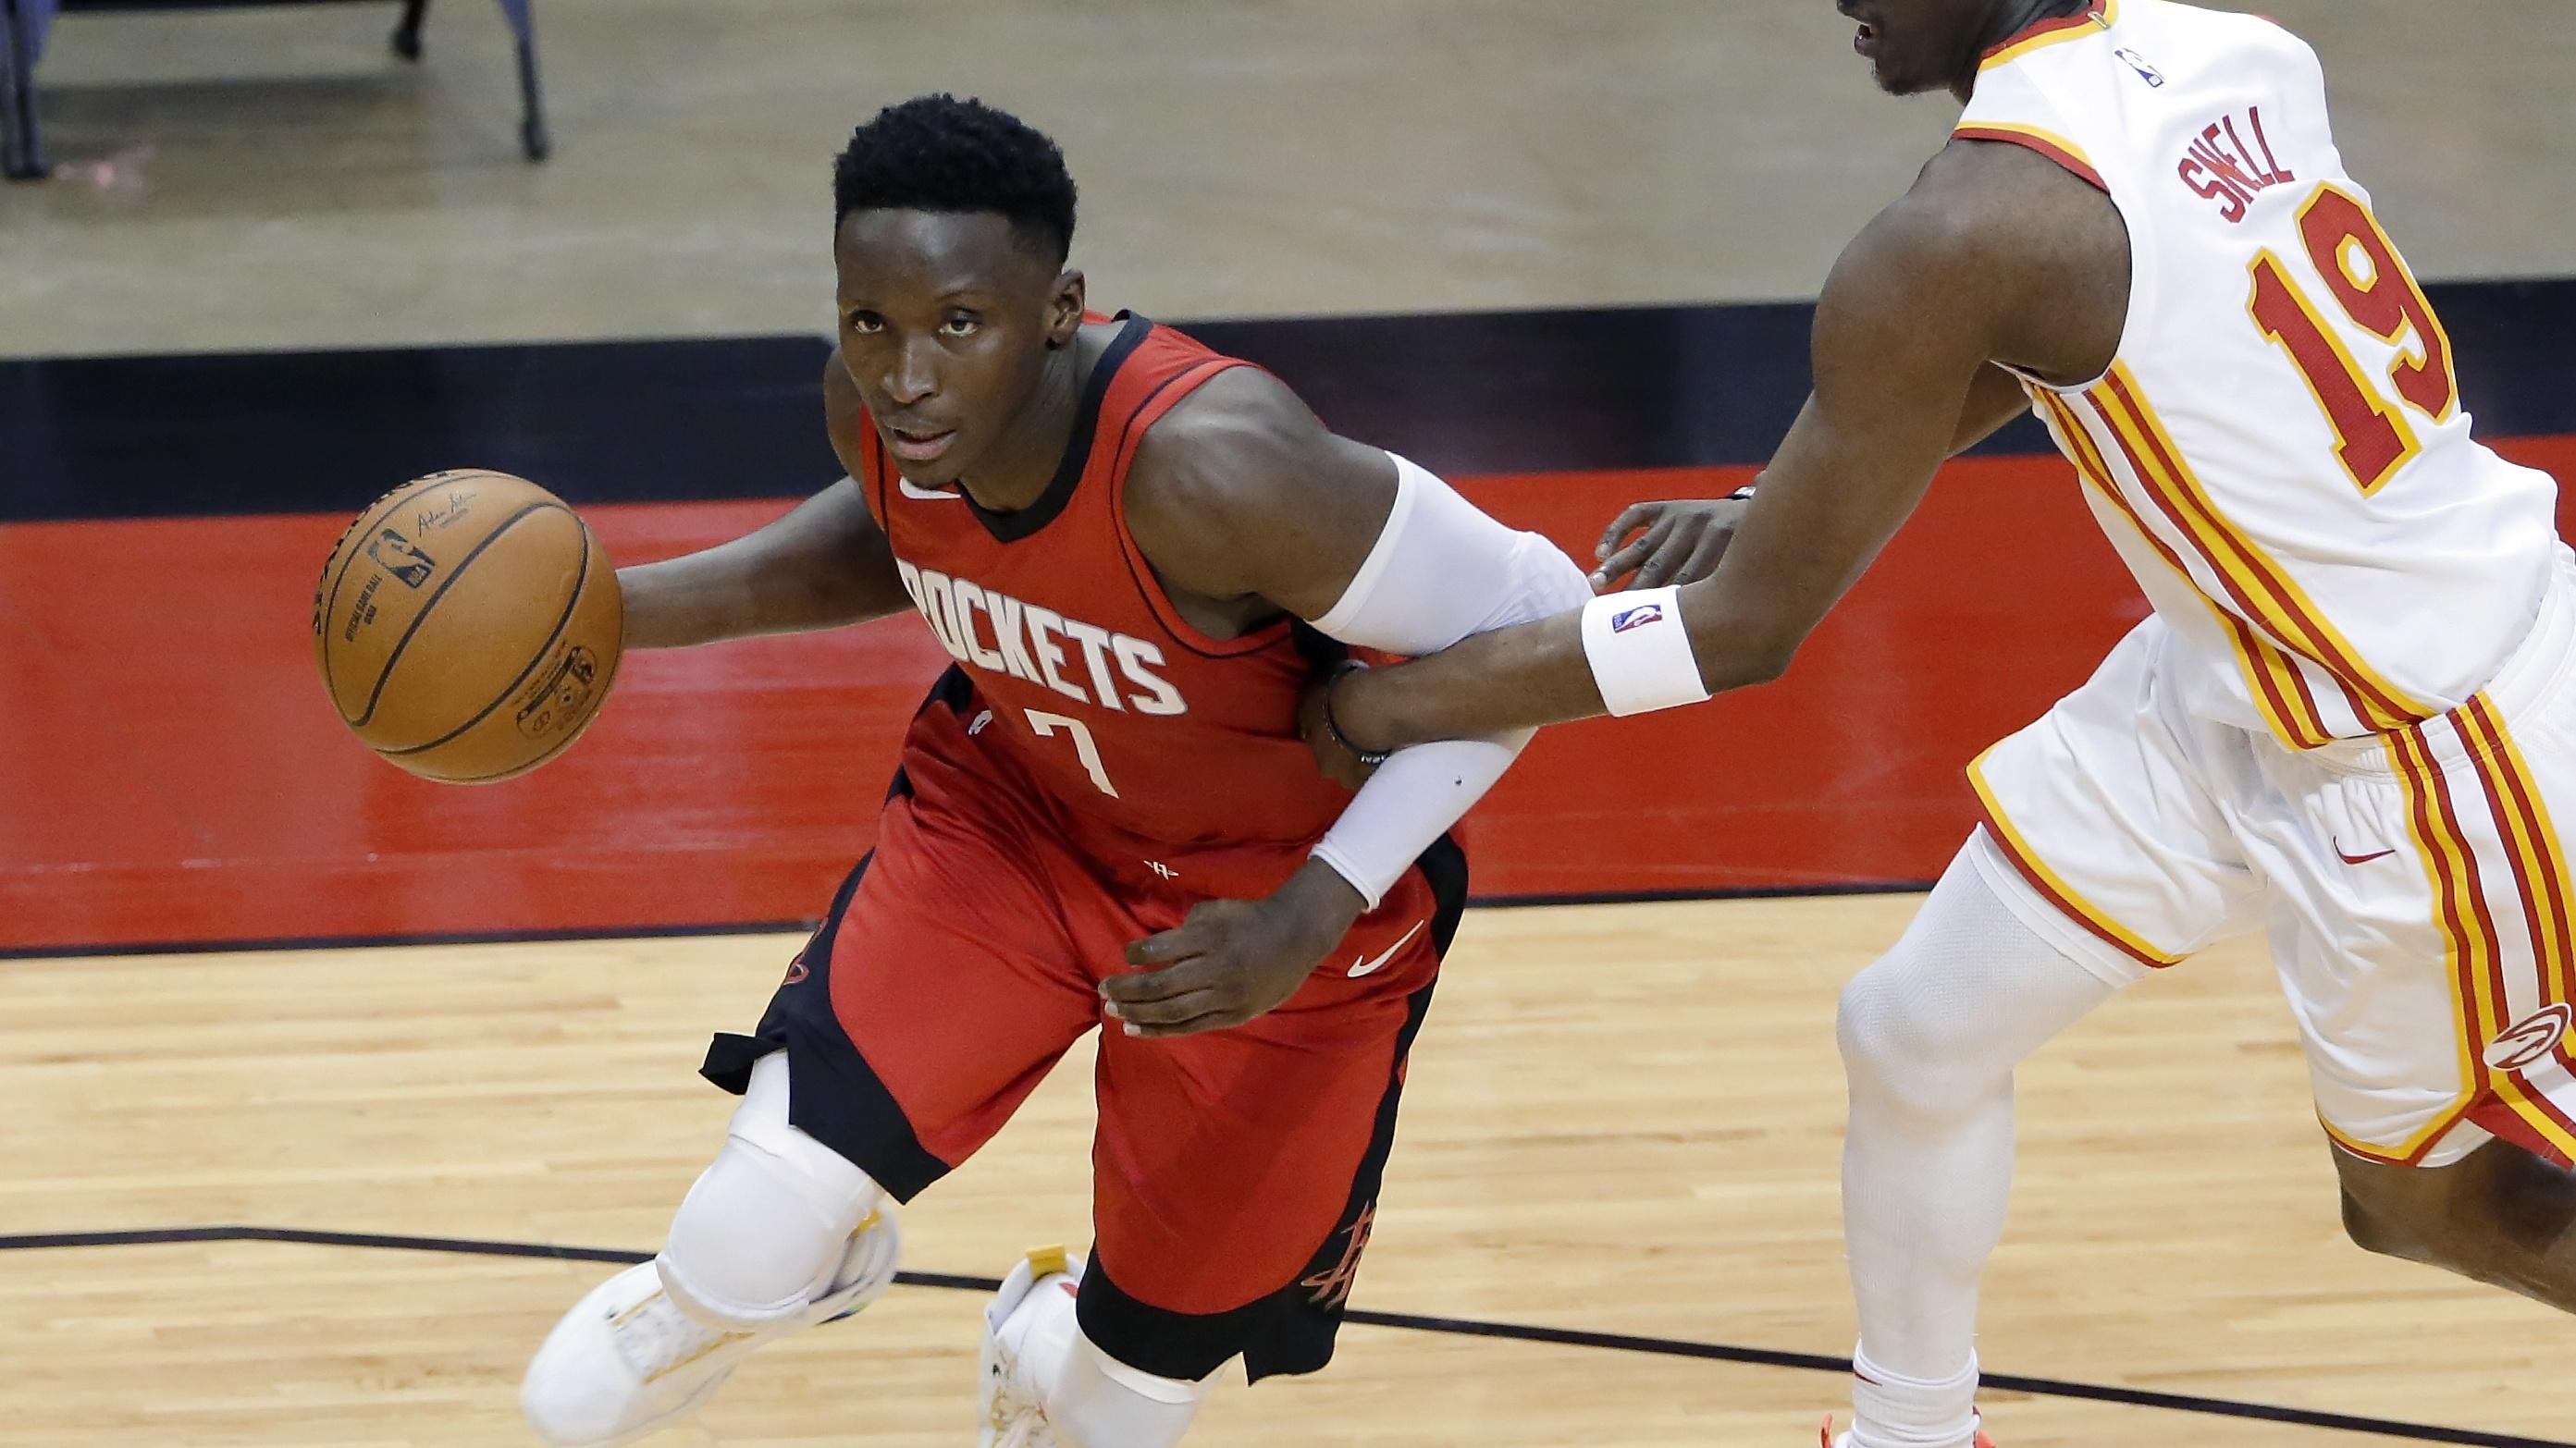 Mar 16, 2021; Houston, Texas, USA; Houston Rockets guard Victor Oladipo (7) is fouled as he drives around Atlanta Hawks guard Tony Snell (19) during the second half at Toyota Center. Mandatory Credit: Michael Wyke/POOL PHOTOS-USA TODAY Sports / © POOL PHOTOS-USA TODAY Sports